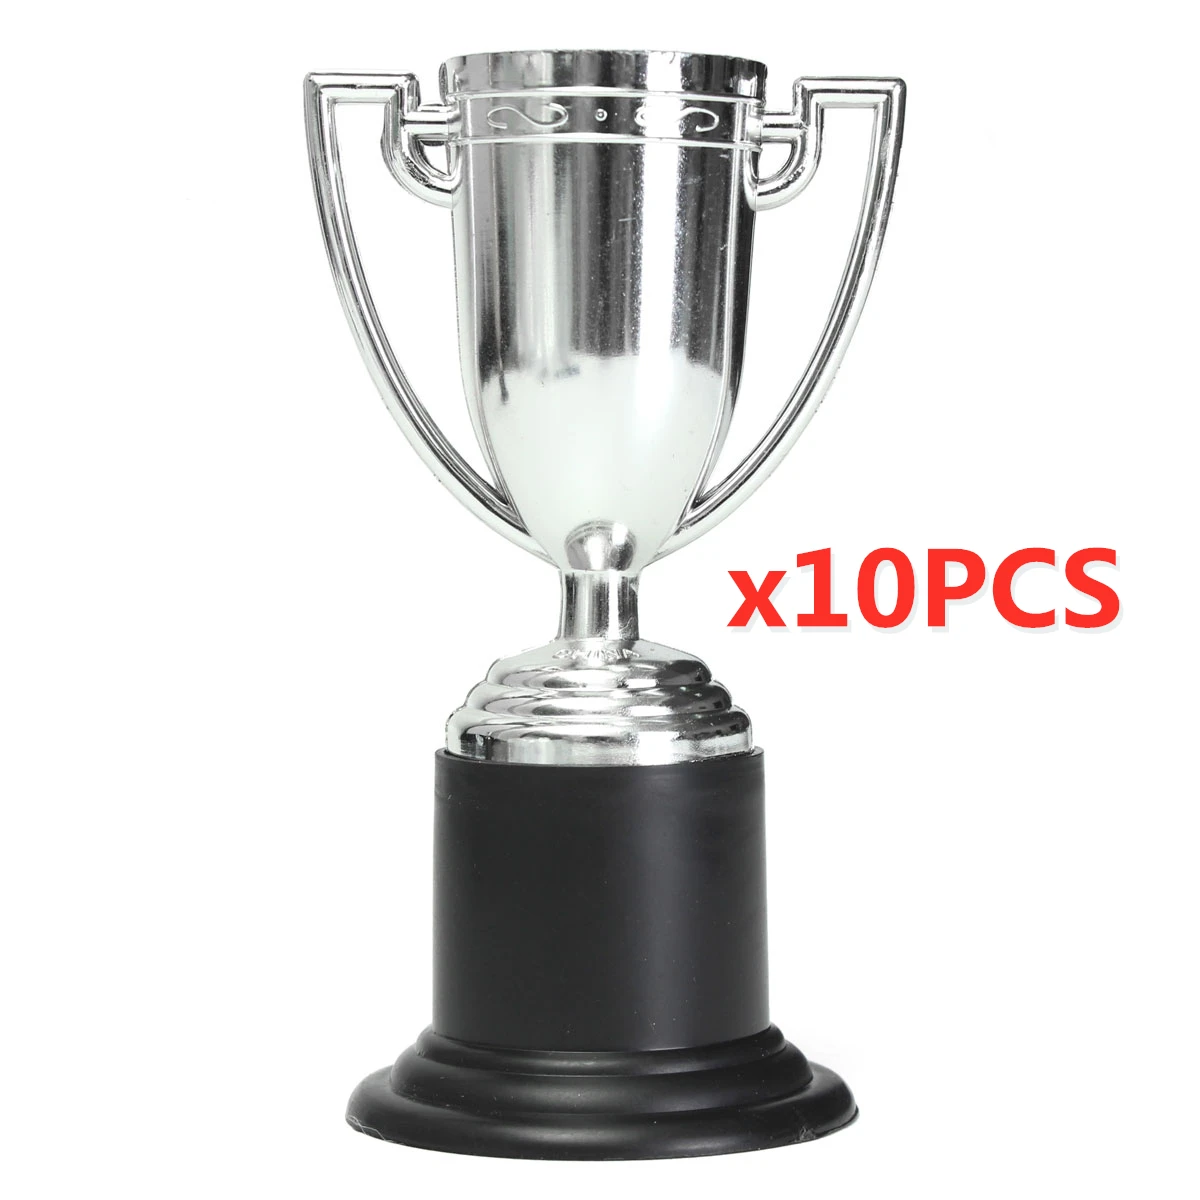 Props Mini Award Trophy Cups Golden Cup Classic Sport Awards Trophy with Black Base for Kids Party Favors Generic 1 pcs Gold Plastic Trophies Rewards 